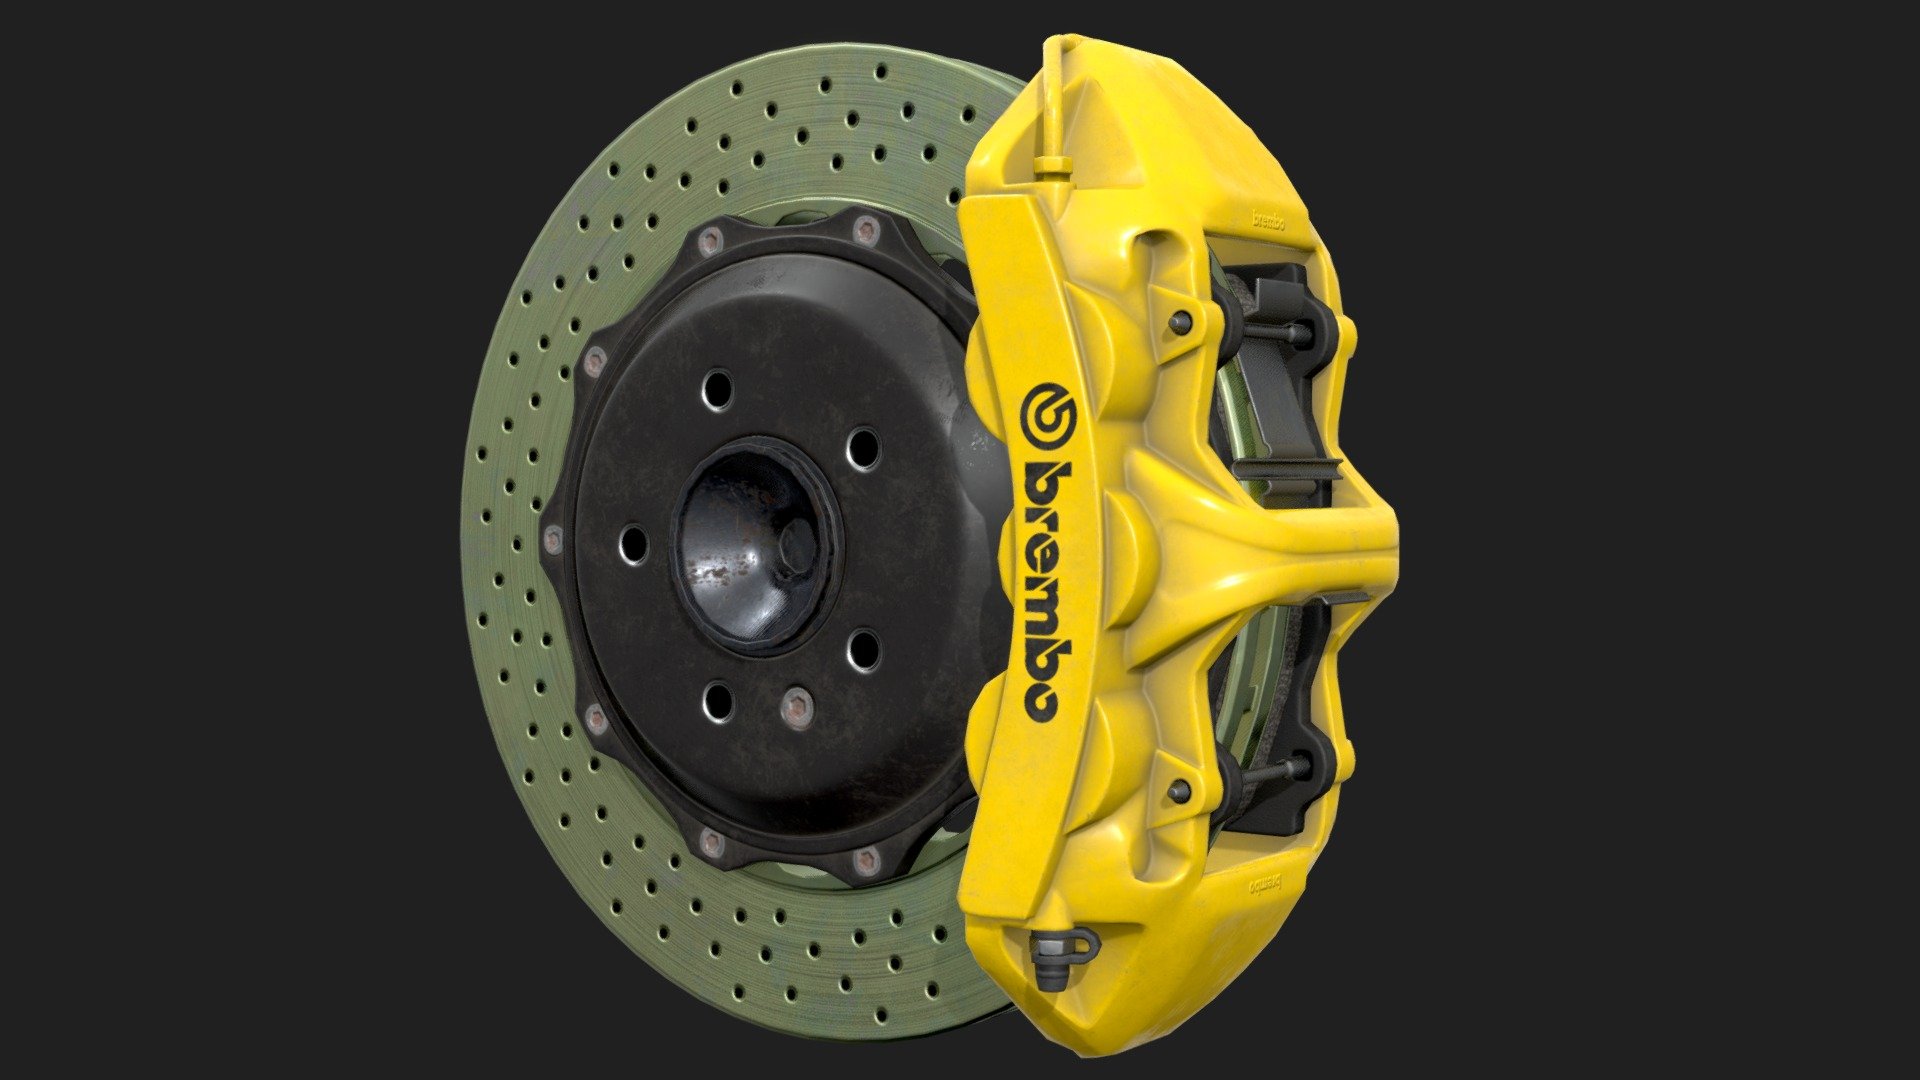 Disk
Polys - 1 984
Verts - 1 857

Dimensions - D 352mm, W 30mm

Support
Polys - 2 134
Verts - 2 052

Dimensions - L 332mm, W 160mm, H 93mm

PBR Low Poly 3d model of sport/racing car brakes by Brembo.You need a minimum of 19 inches rims to fit these brakes.
There is 2 meshes but they use 1 texture set. This model uses the metalness PBR workflow and includes 4k PNG files for the following:


Base Color
Metalness
Roughness
Normal(DirectX)
AO(additional map, it already baked in to Base Color texture)  

Normal maps use DirectX mode, if your software works with OpenGL just invert the green channel.

There is only roughness texture, so if you need glossiness map just invert the roughness texture. The metallic texture in spec/gloss model should be used as the ior map or mask for the blended material and use Base Color texture as specular(reflection) map for second layer material.
Model is fully unwrapped - overlapping for some details.

Originaly created in 3Ds Max 2015
Real-world scale - Brakes BREMBO 6 Pots LowPoly - 3D model by Terllok 3d model